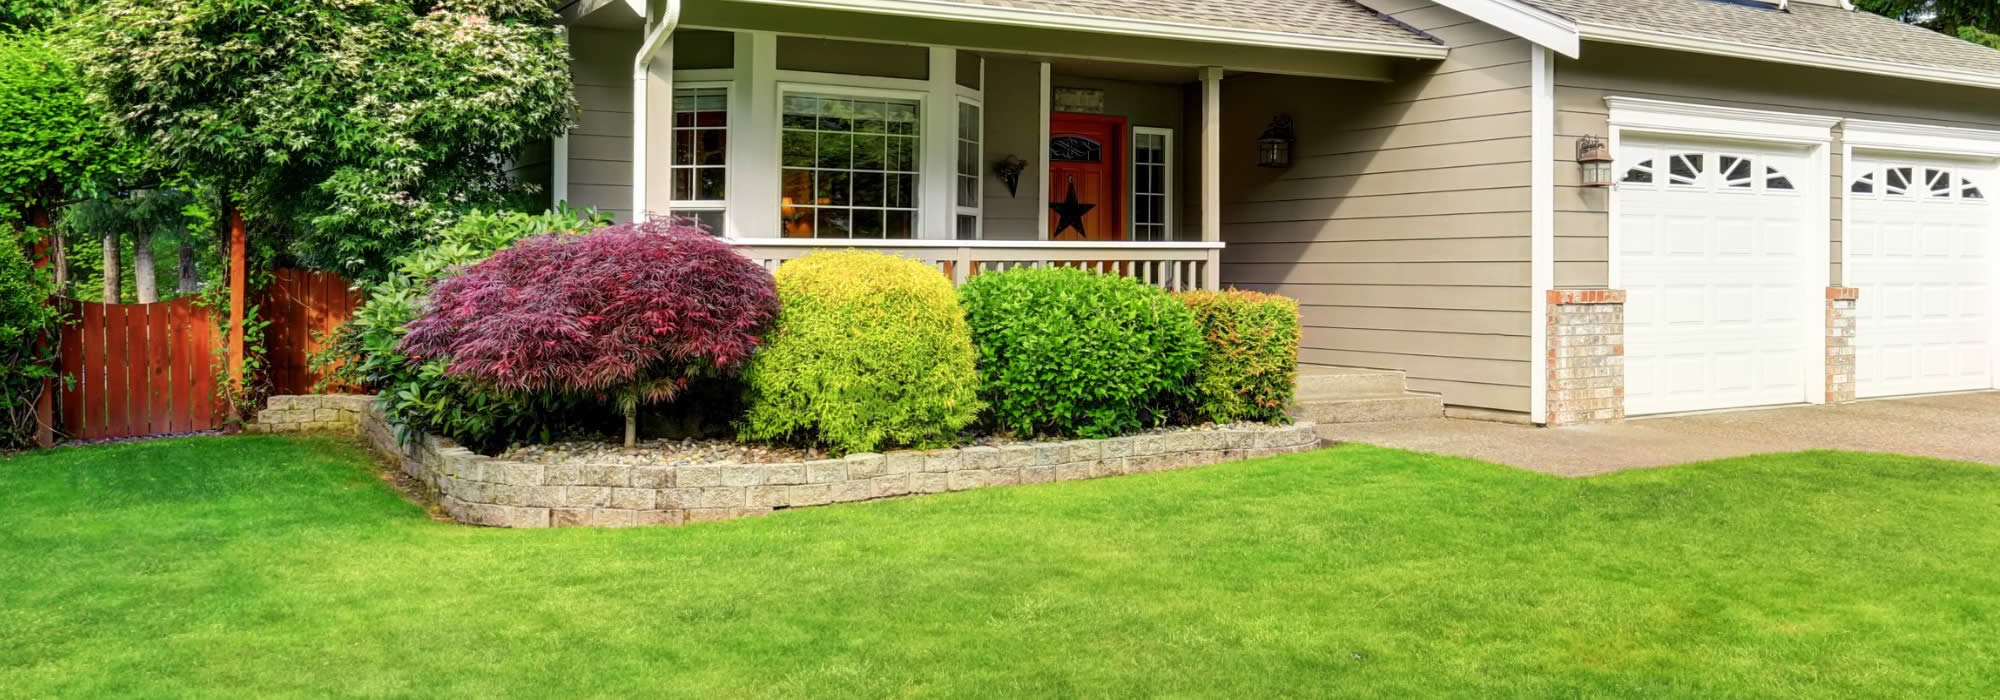 Landscaping Services in McFarland